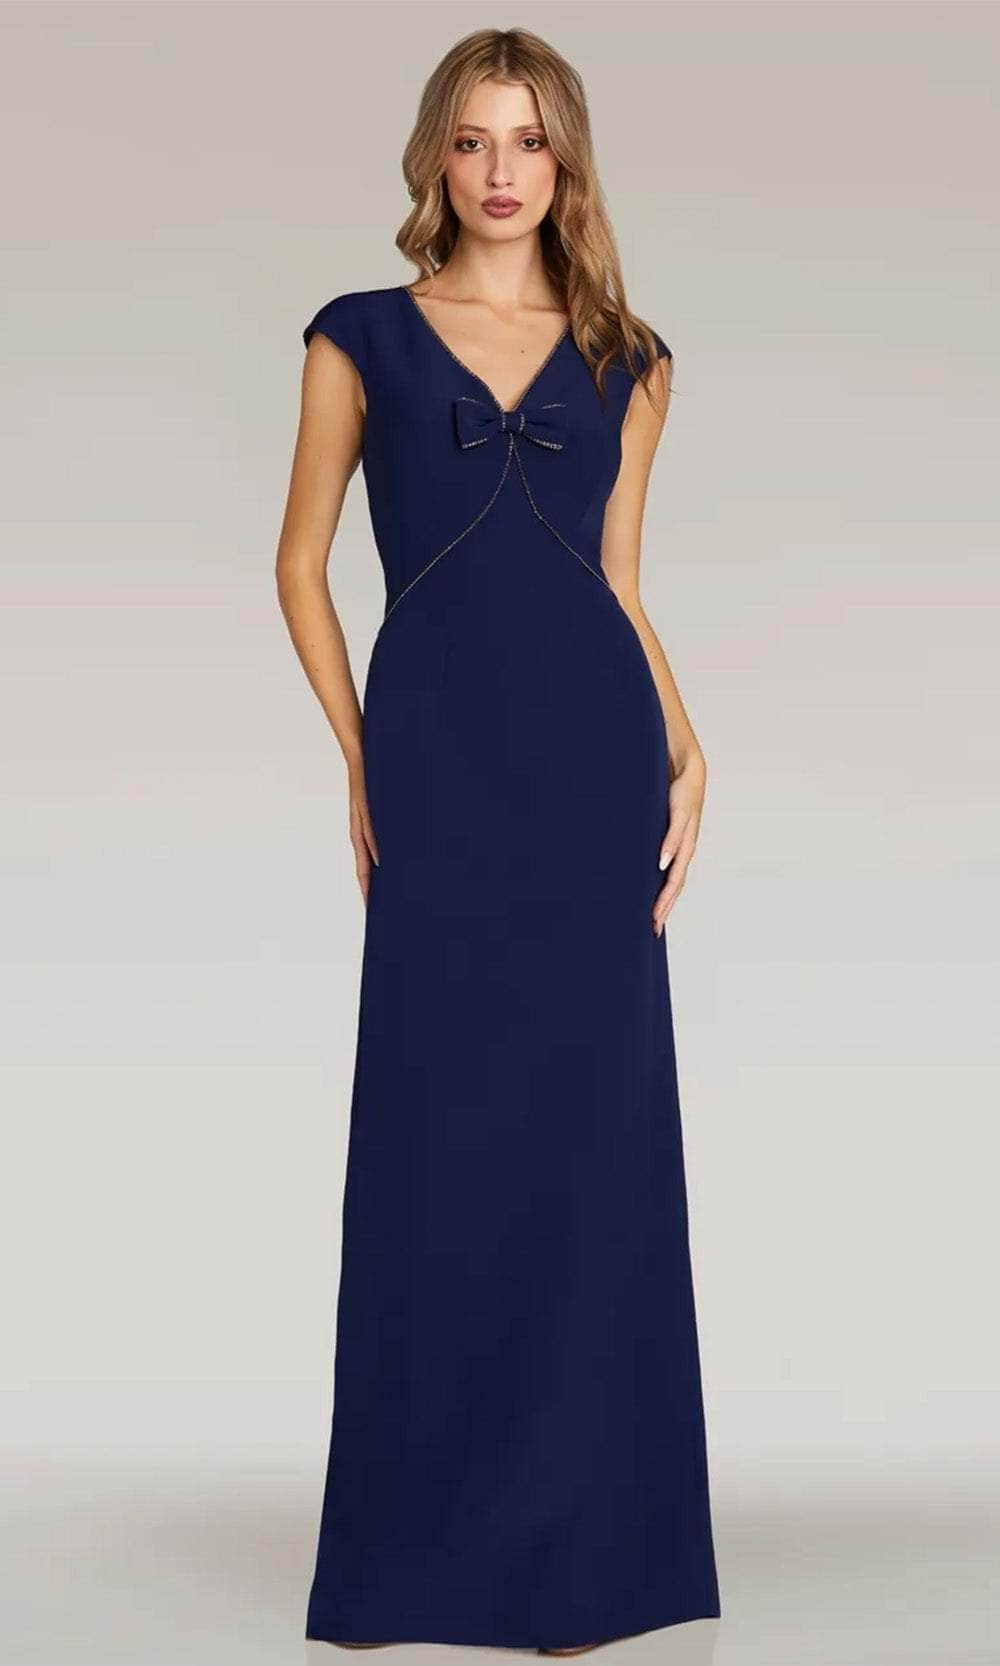 Image of Gia Franco 12307 - Bow Detailed Evening Dress